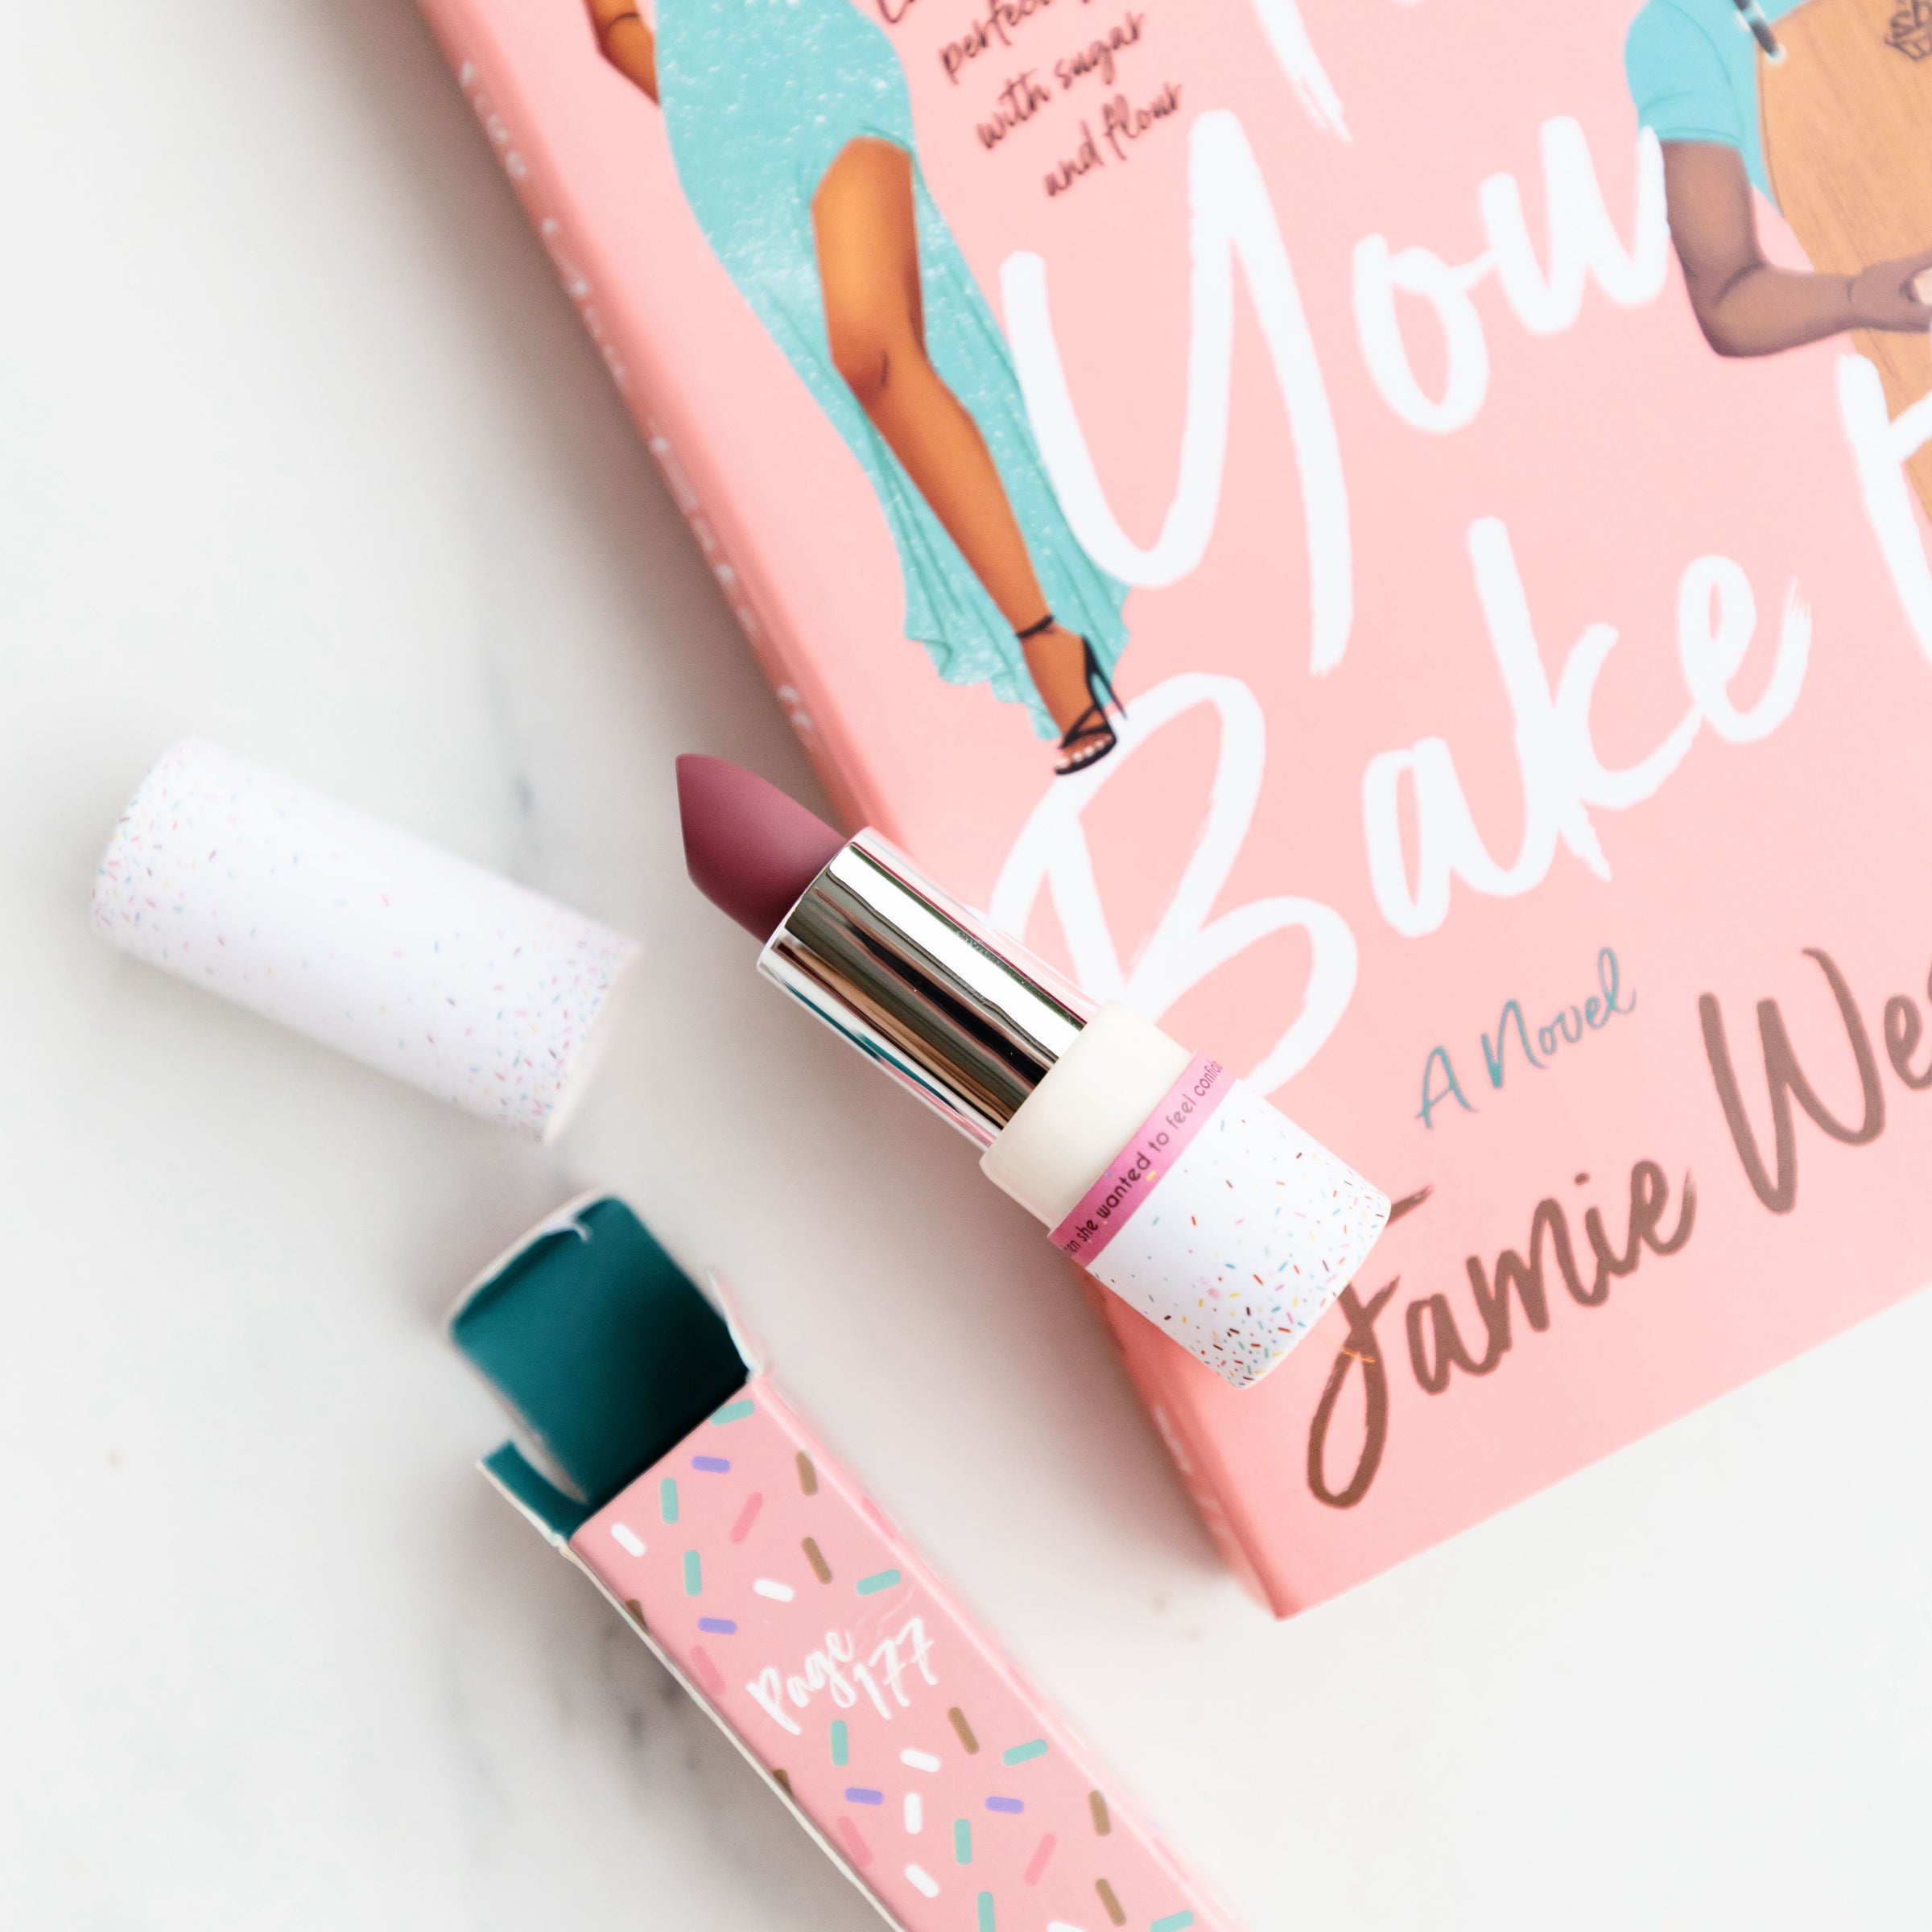 A copy of Fake It Till You Bake It by Jamie Wesley is in the corner. A tube of dark pink lipstick sits opened on top of the book cover. The tube is white and covered in rainbow dots. A pink box with a pattern of multi-colored sprinkles sits opened beneath the lipstick with Page 177 written on it.